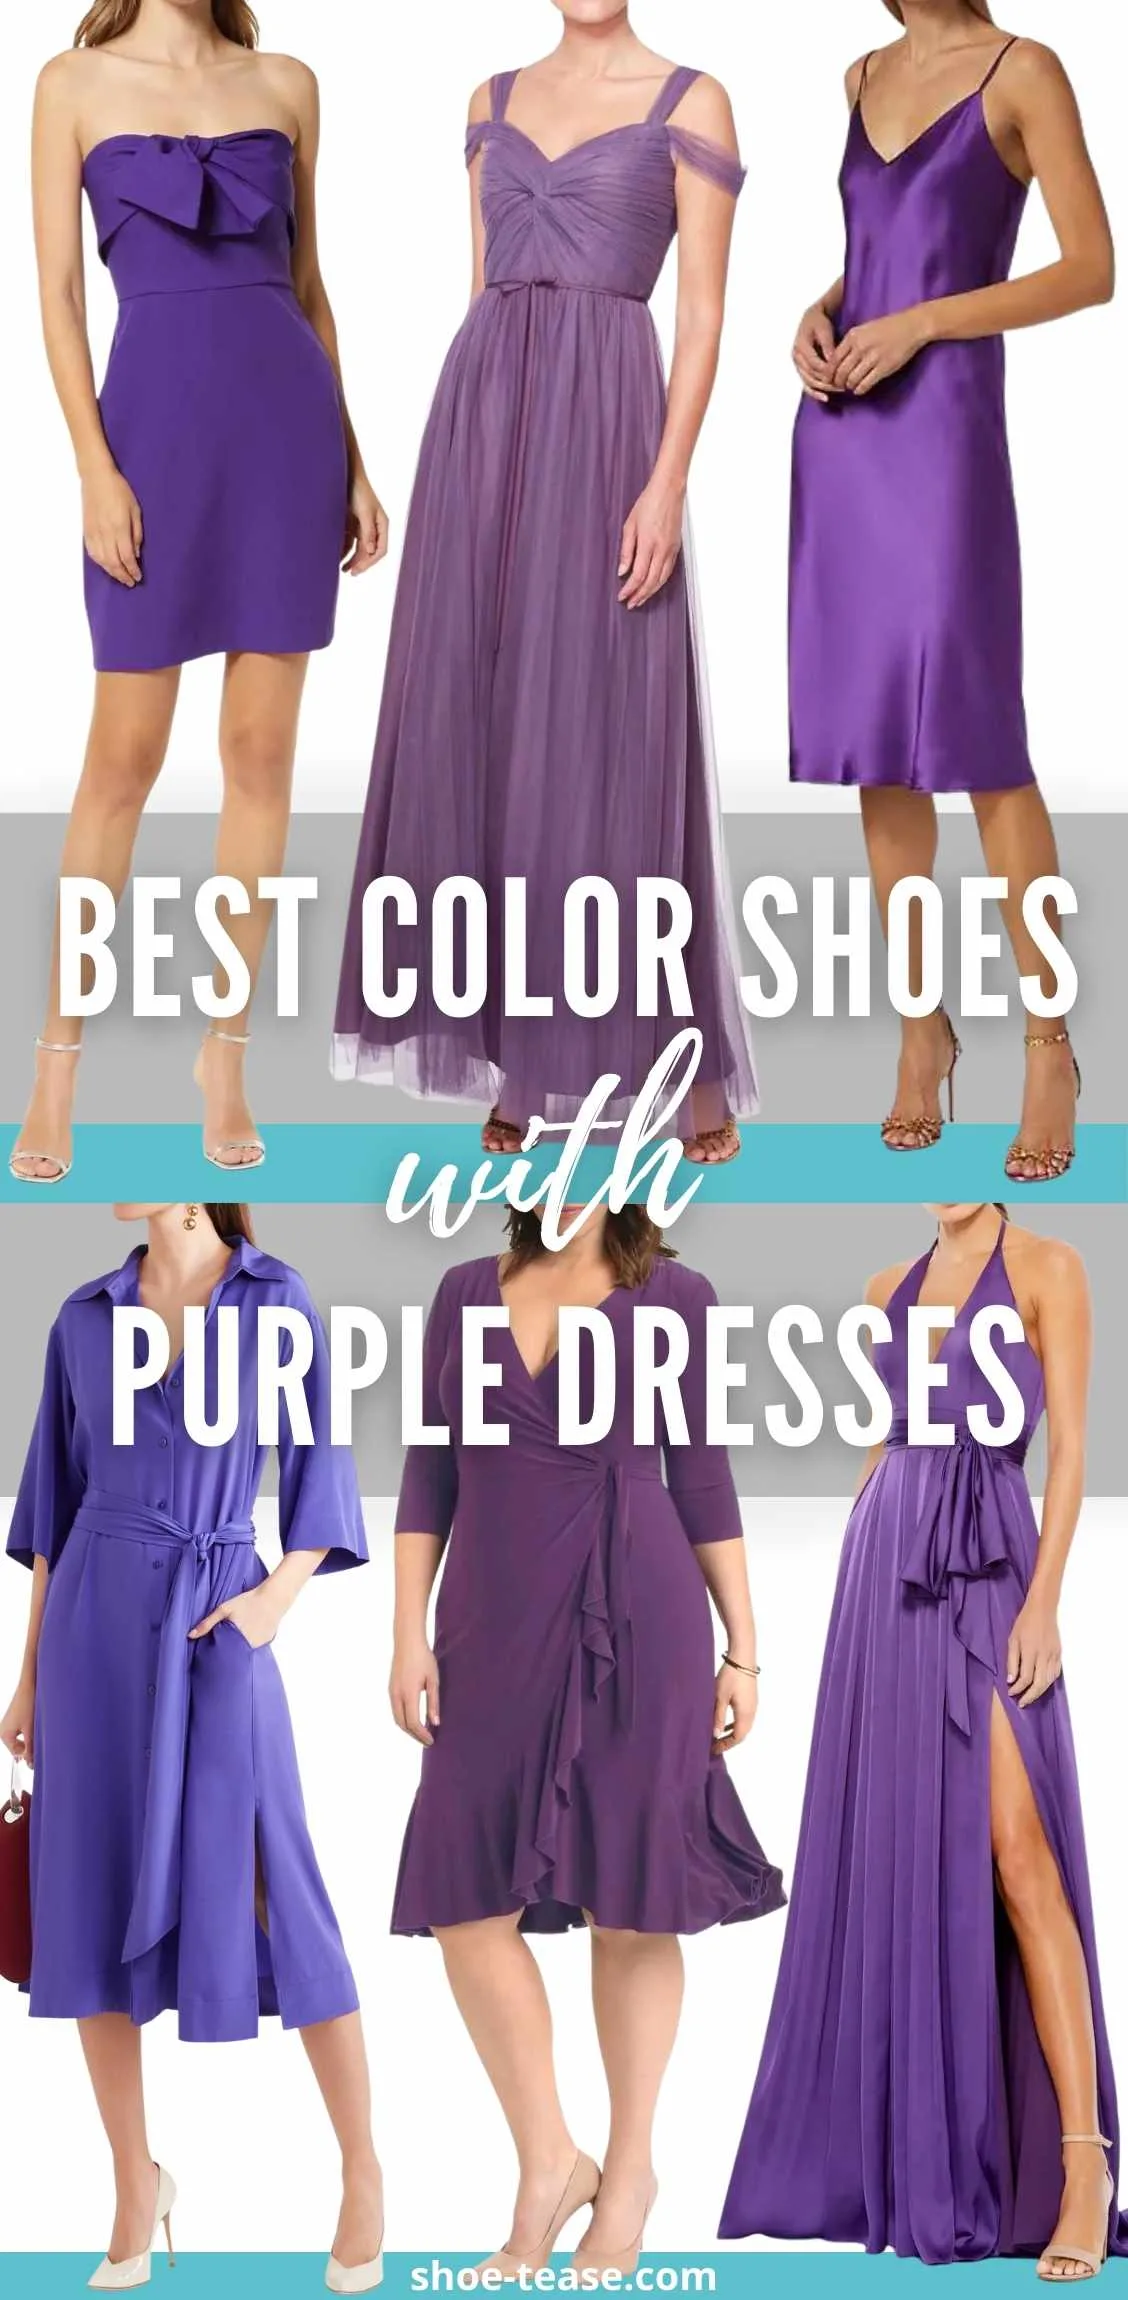 8 Best Color Shoes to Wear with a Purple Dress Outfit